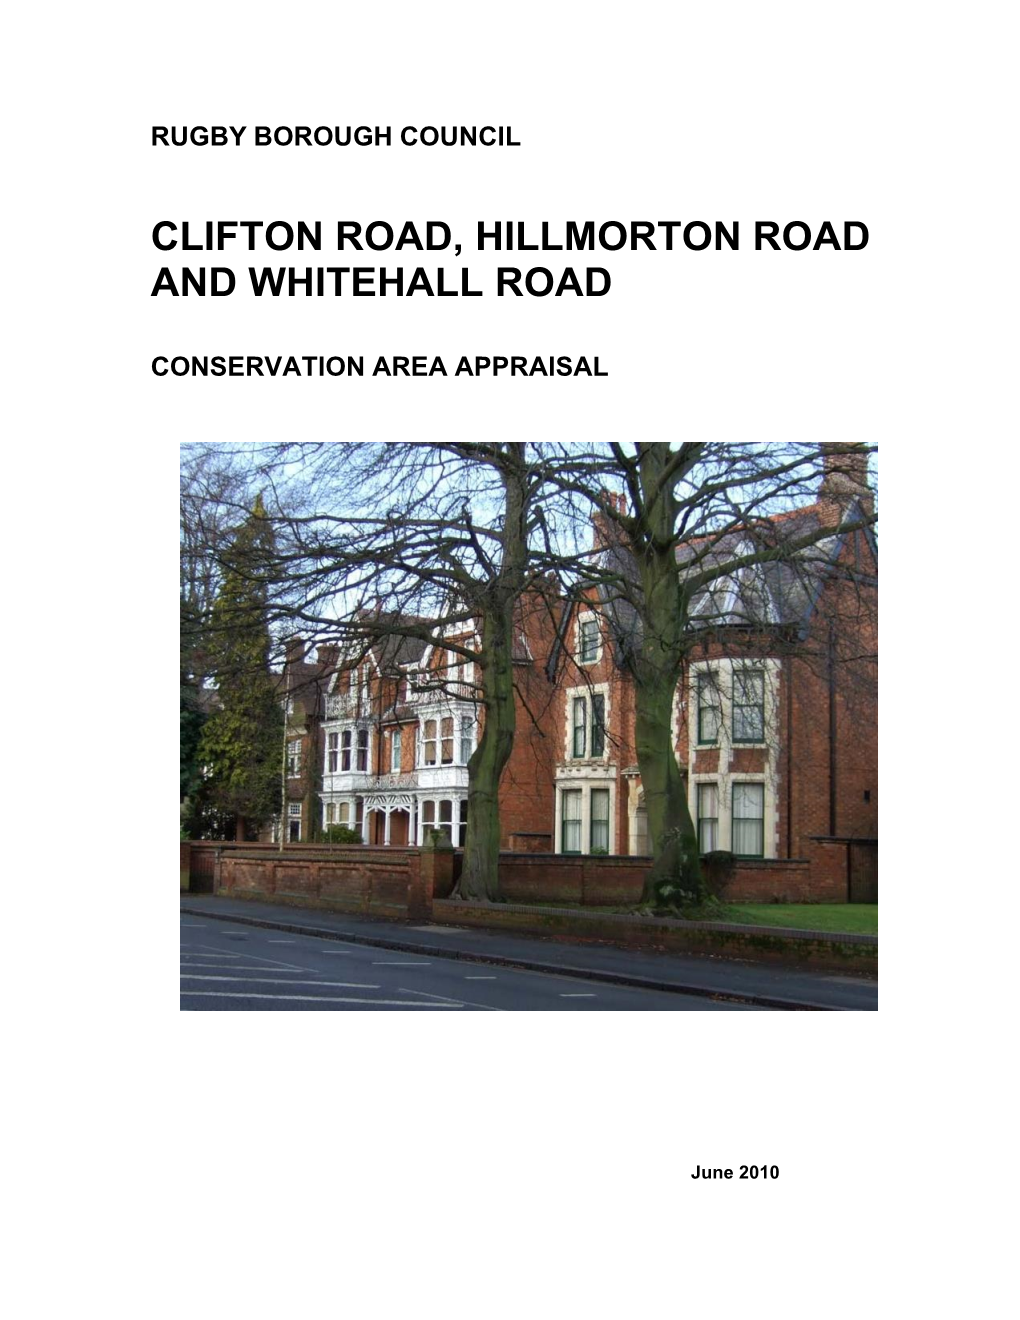 Clifton Road, Hillmorton Road and Whitehall Road